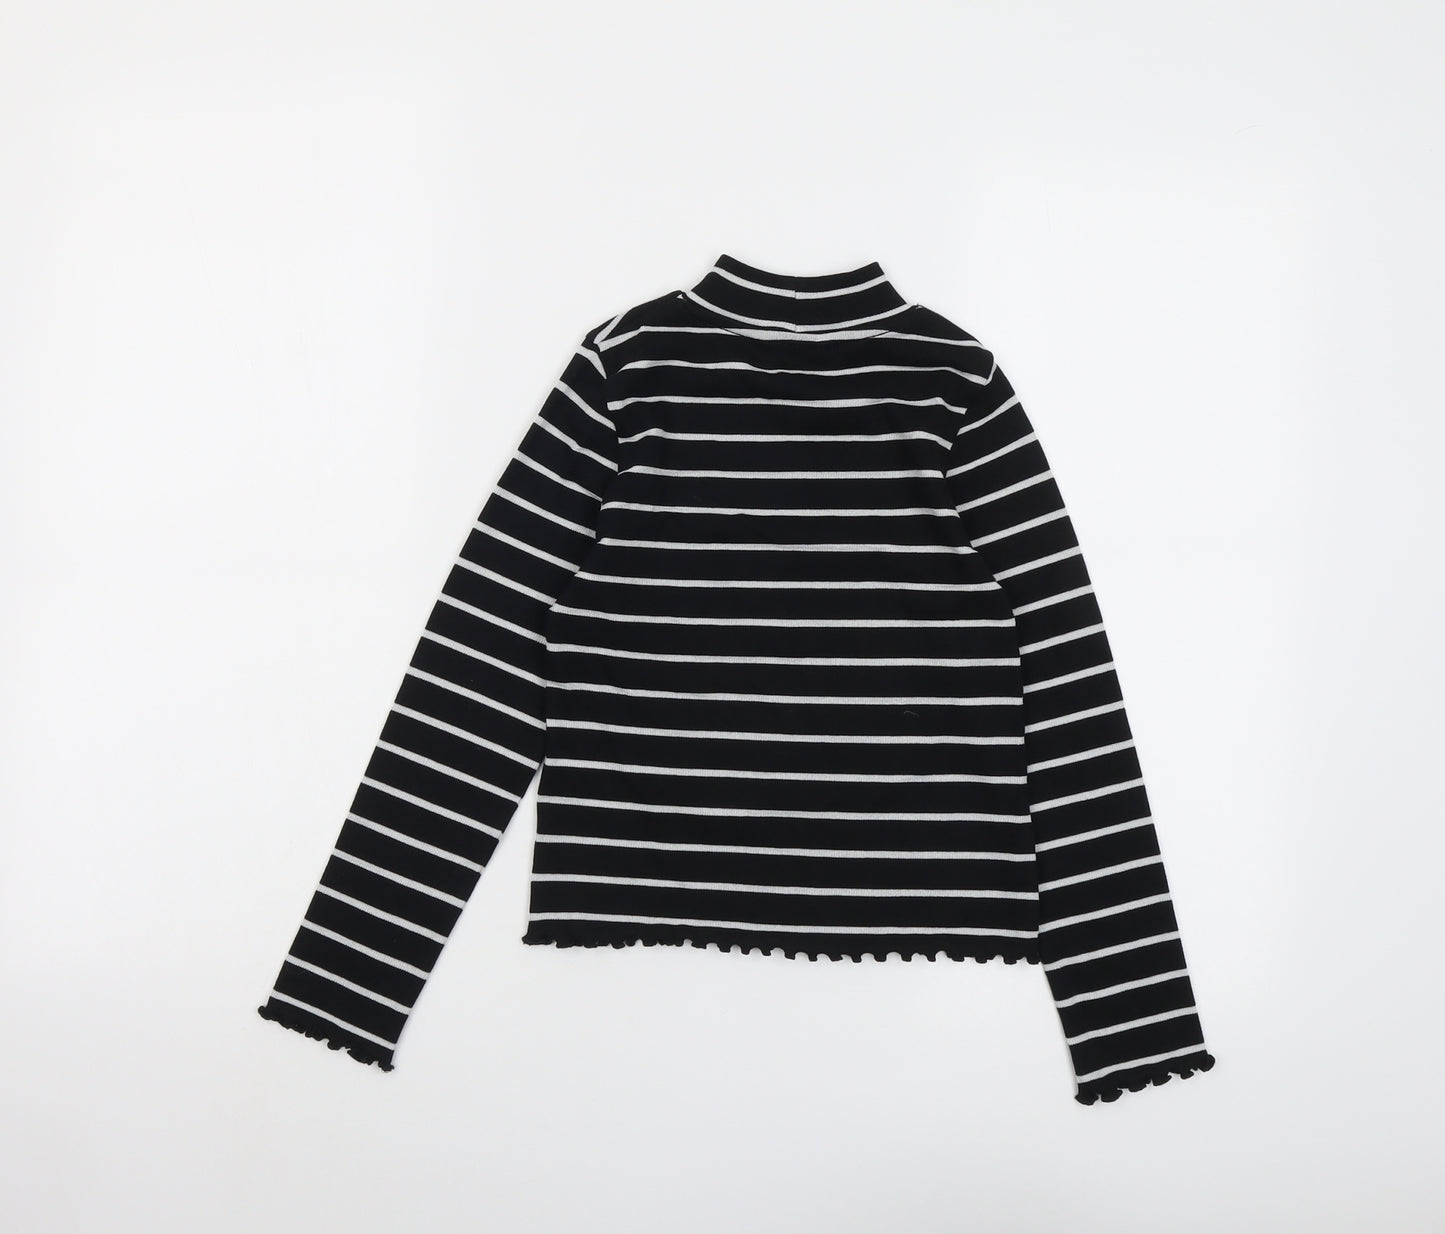 Marks and Spencer Girls Black Striped Cotton Basic T-Shirt Size 8-9 Years Mock Neck Pullover